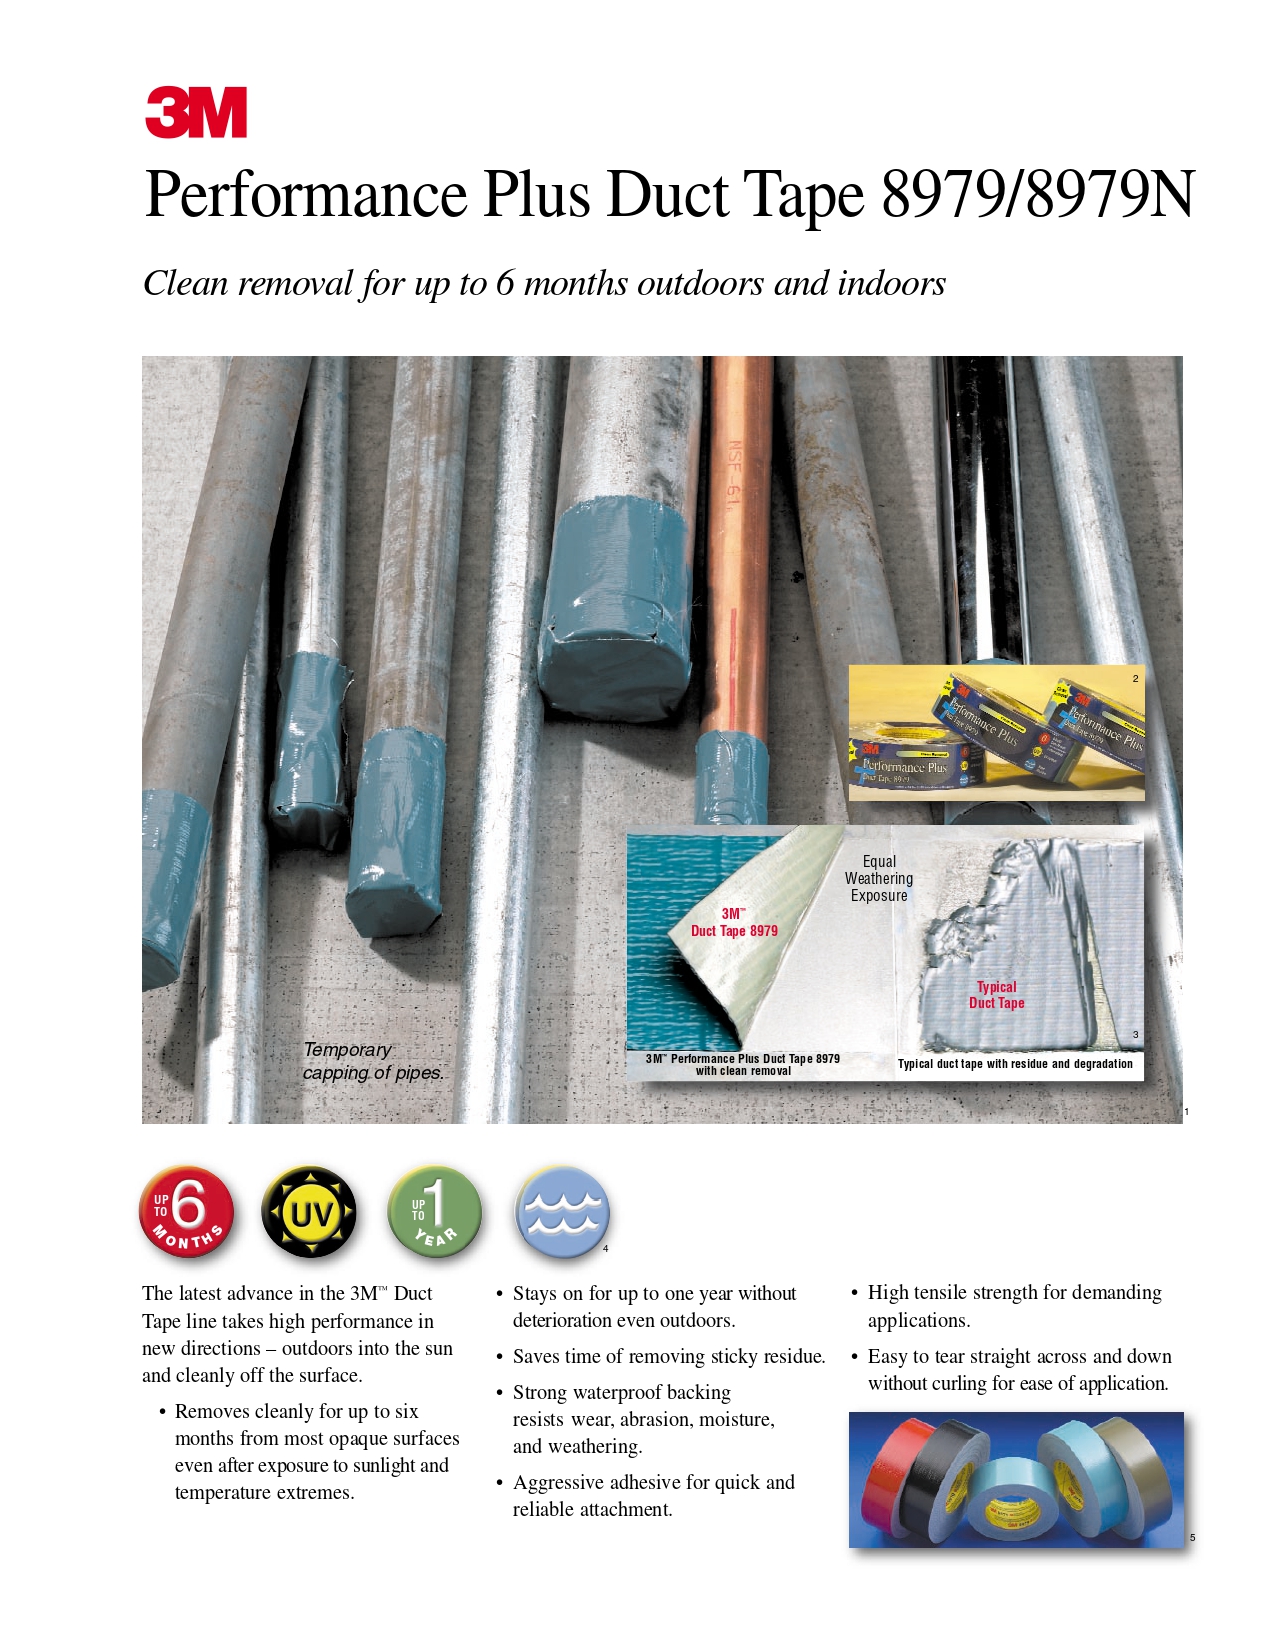 3M Performance Plus Duct Tape 8979 ,Strong waterproof backing